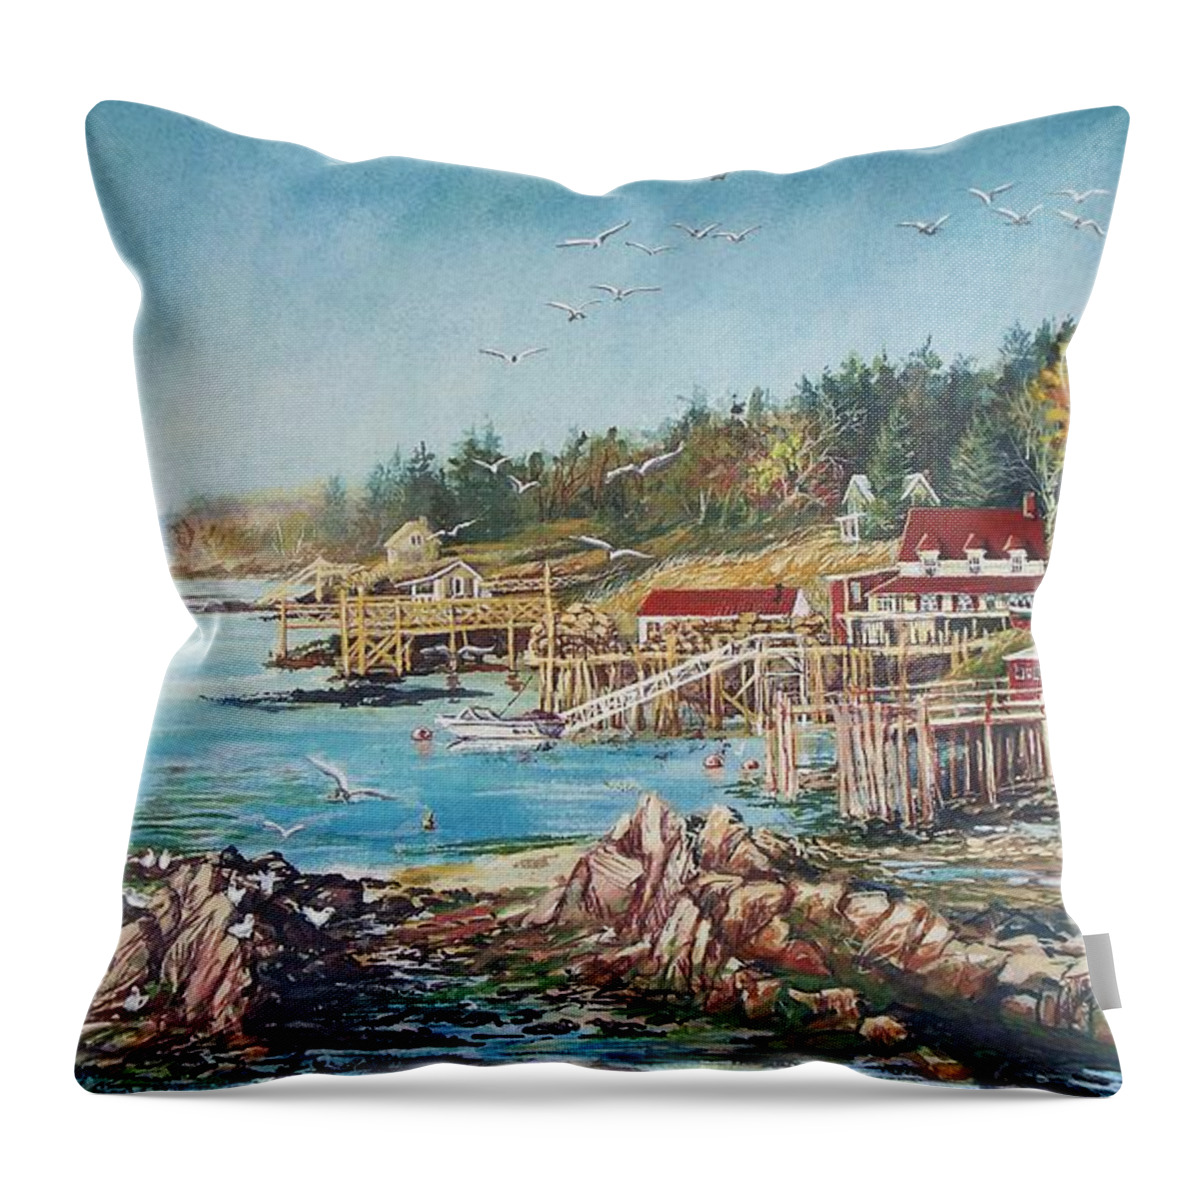  Seagulls Throw Pillow featuring the painting Across the Bridge by Joy Nichols